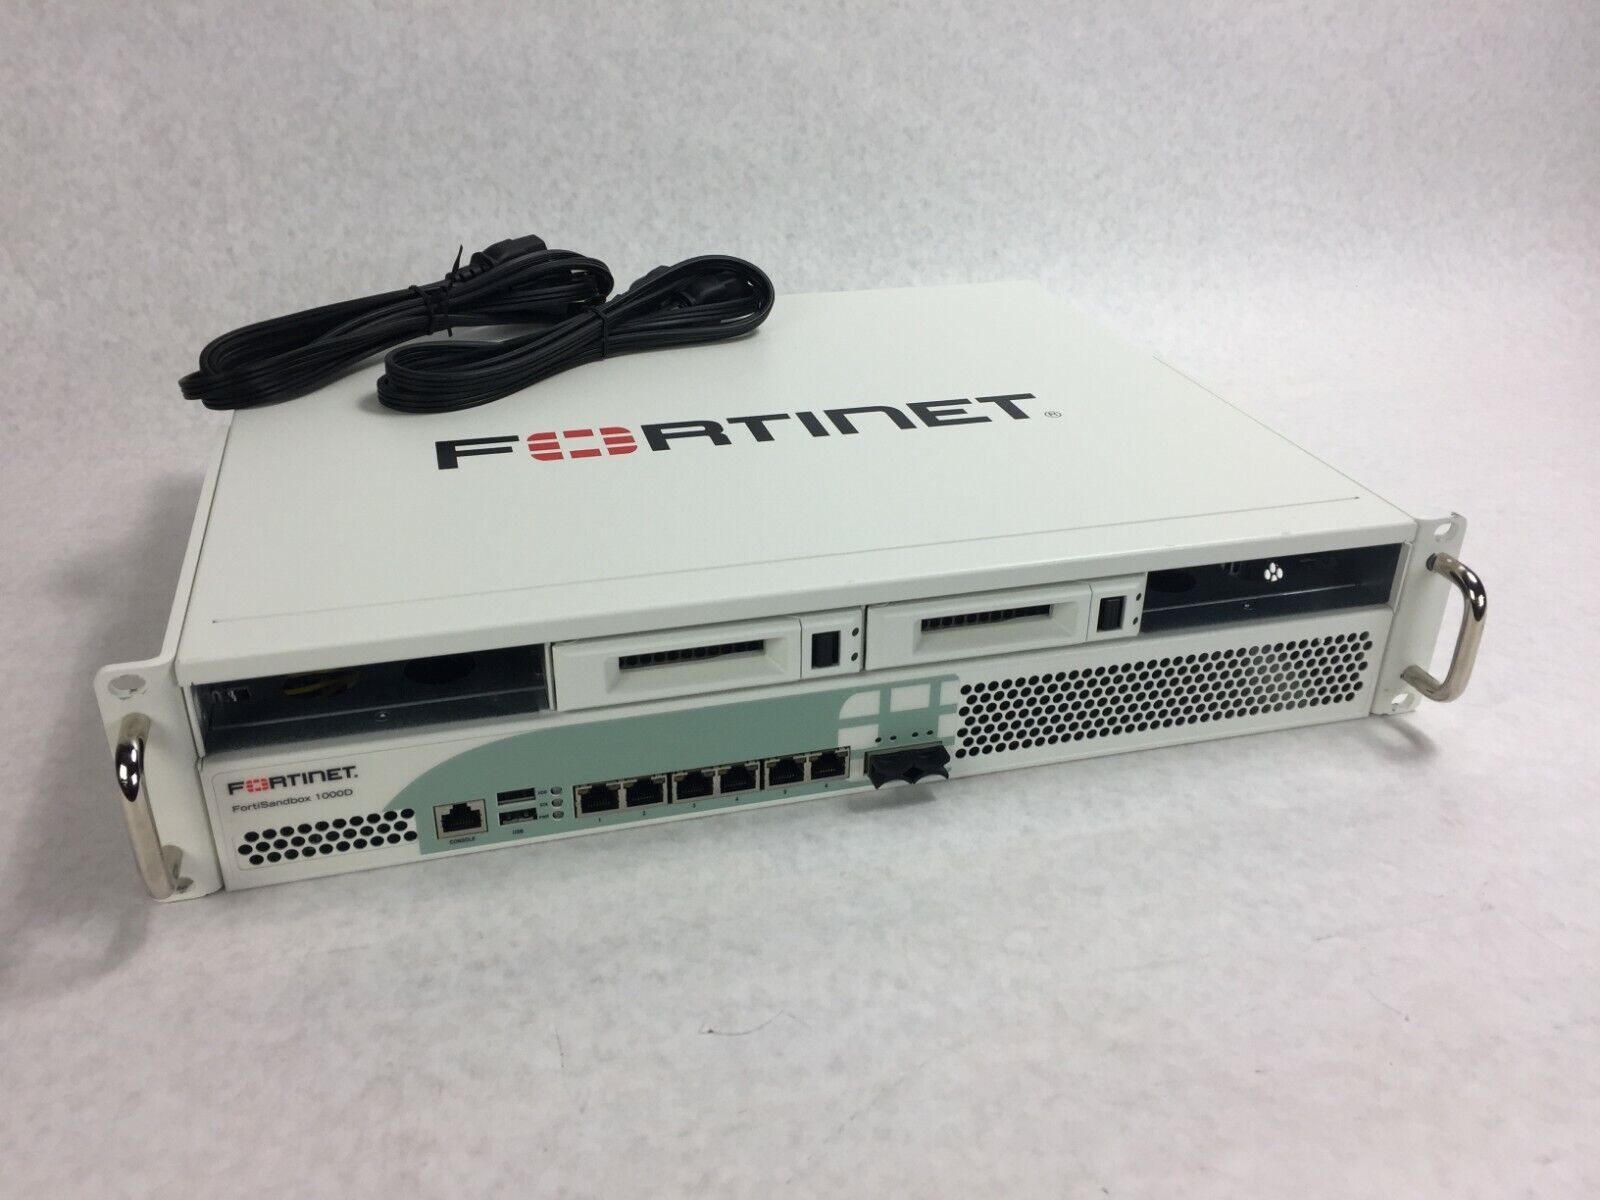 Fortinet FortiSandbox 1000D  FSA-1000D-USG  No HD  No OS  Includes 2 Power Cords